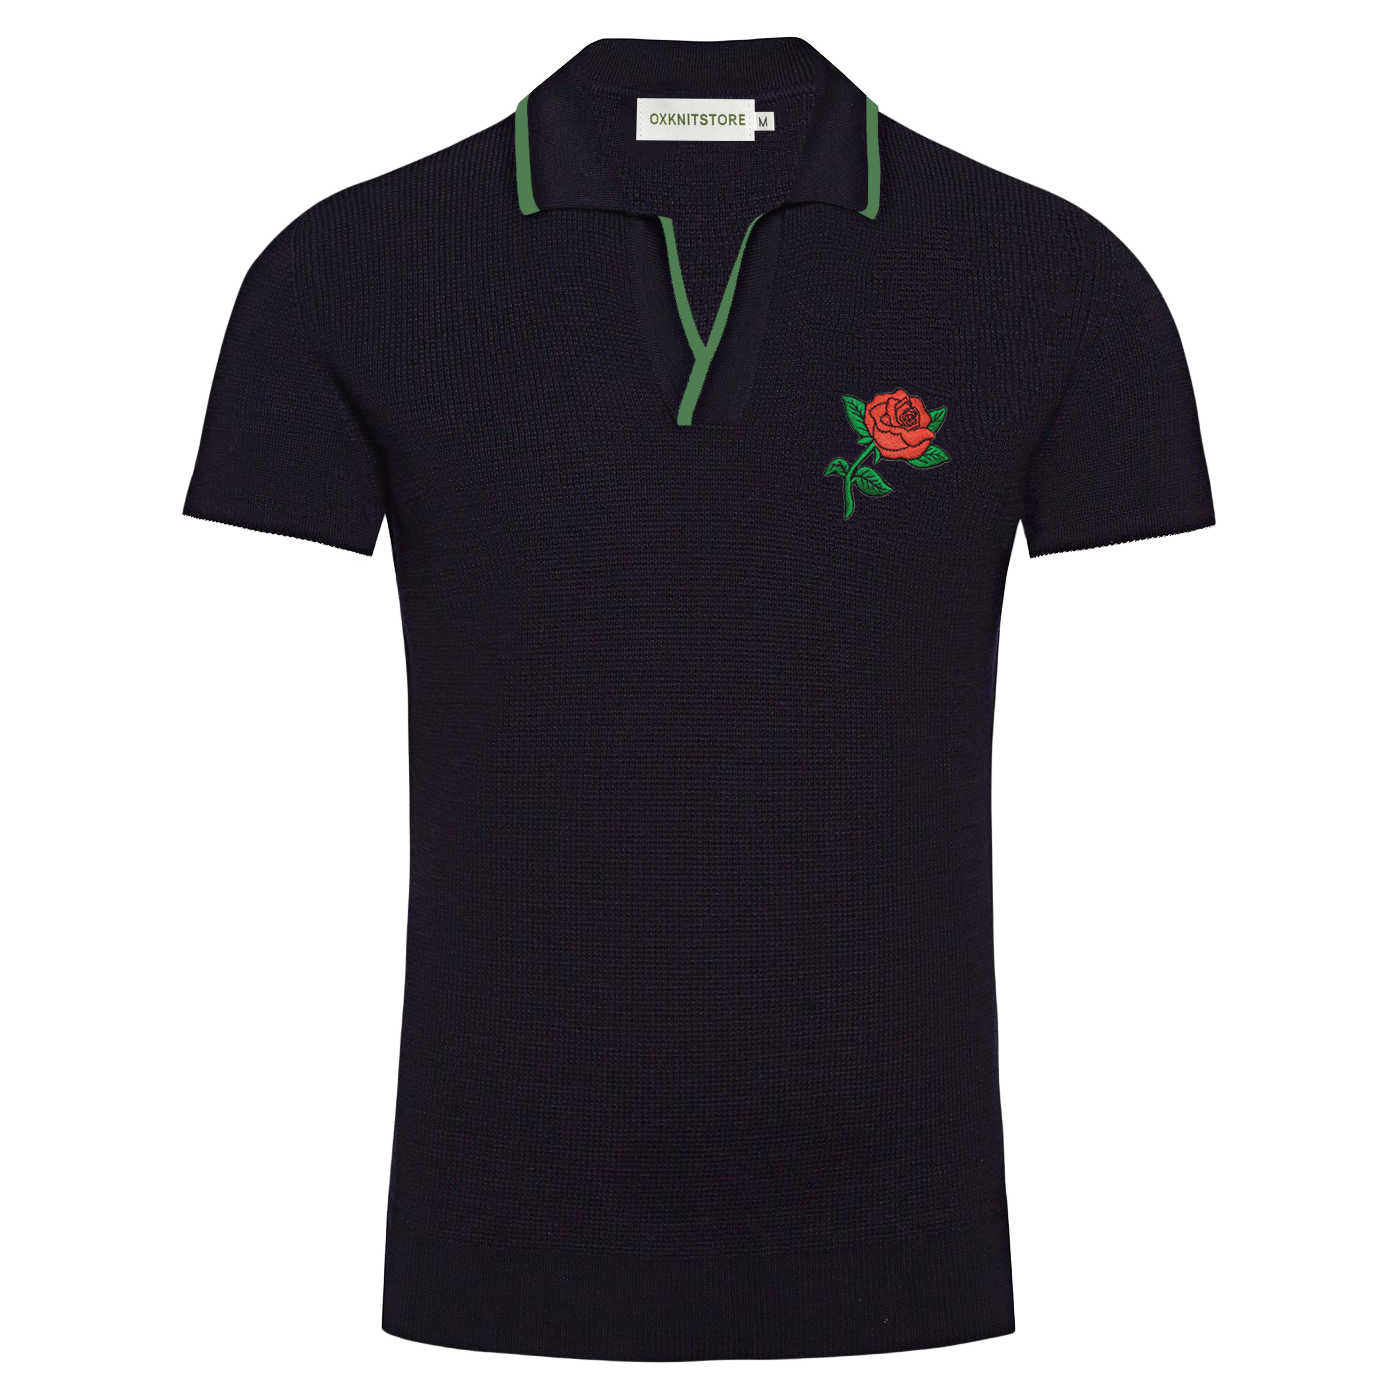 Men's black vintage floral embroidery knitted polo shirt